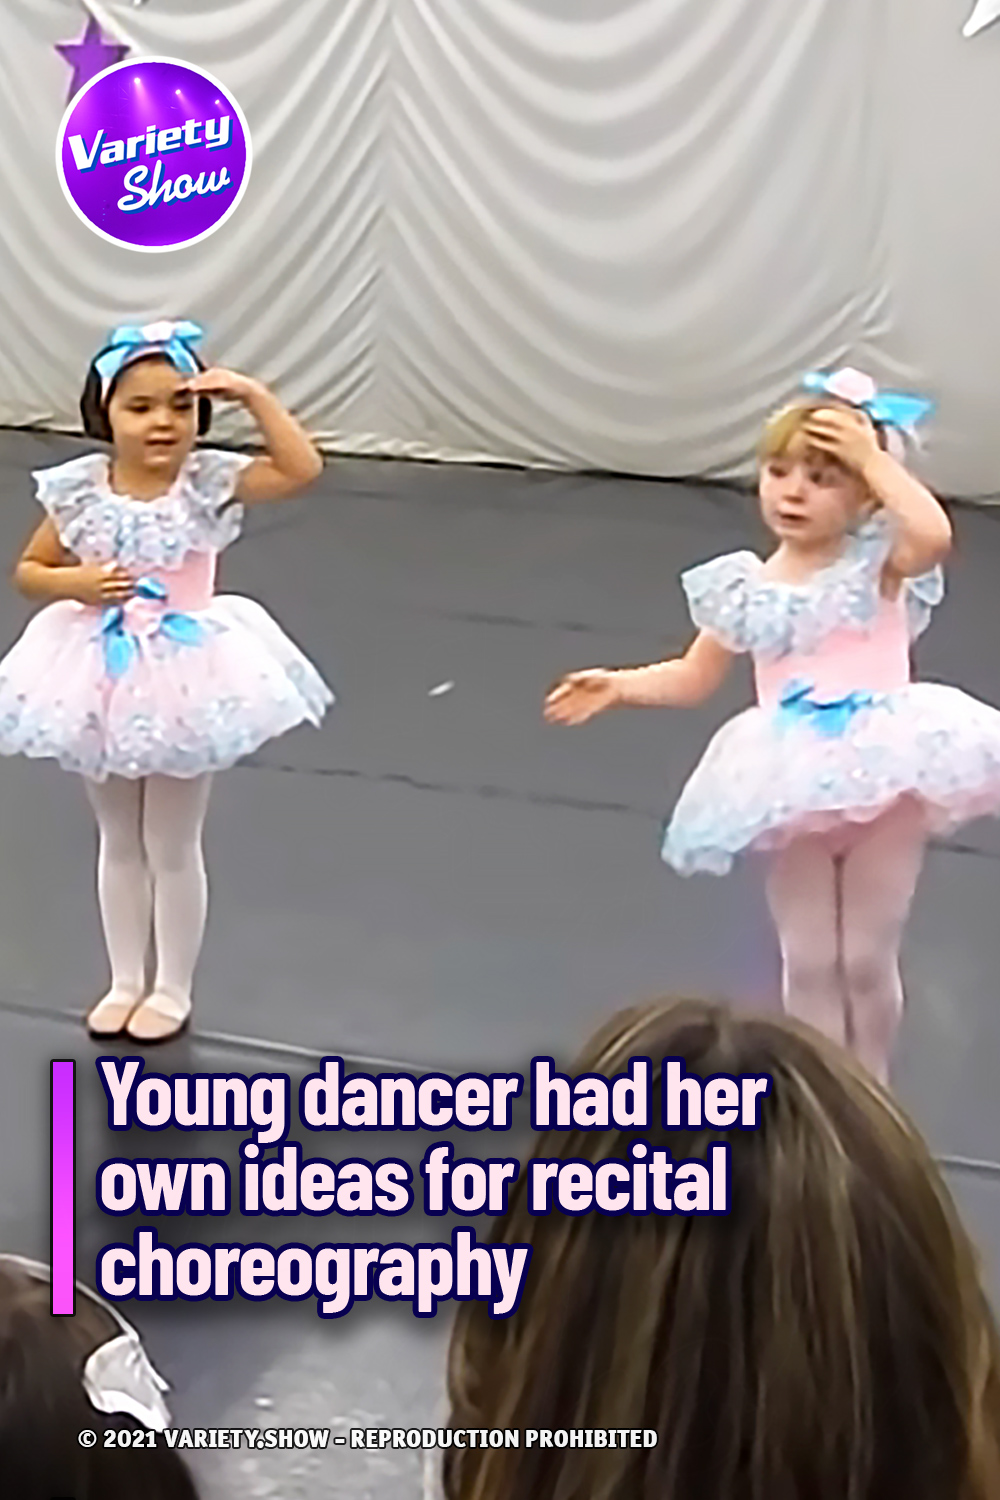 Young dancer had her own ideas for recital choreography